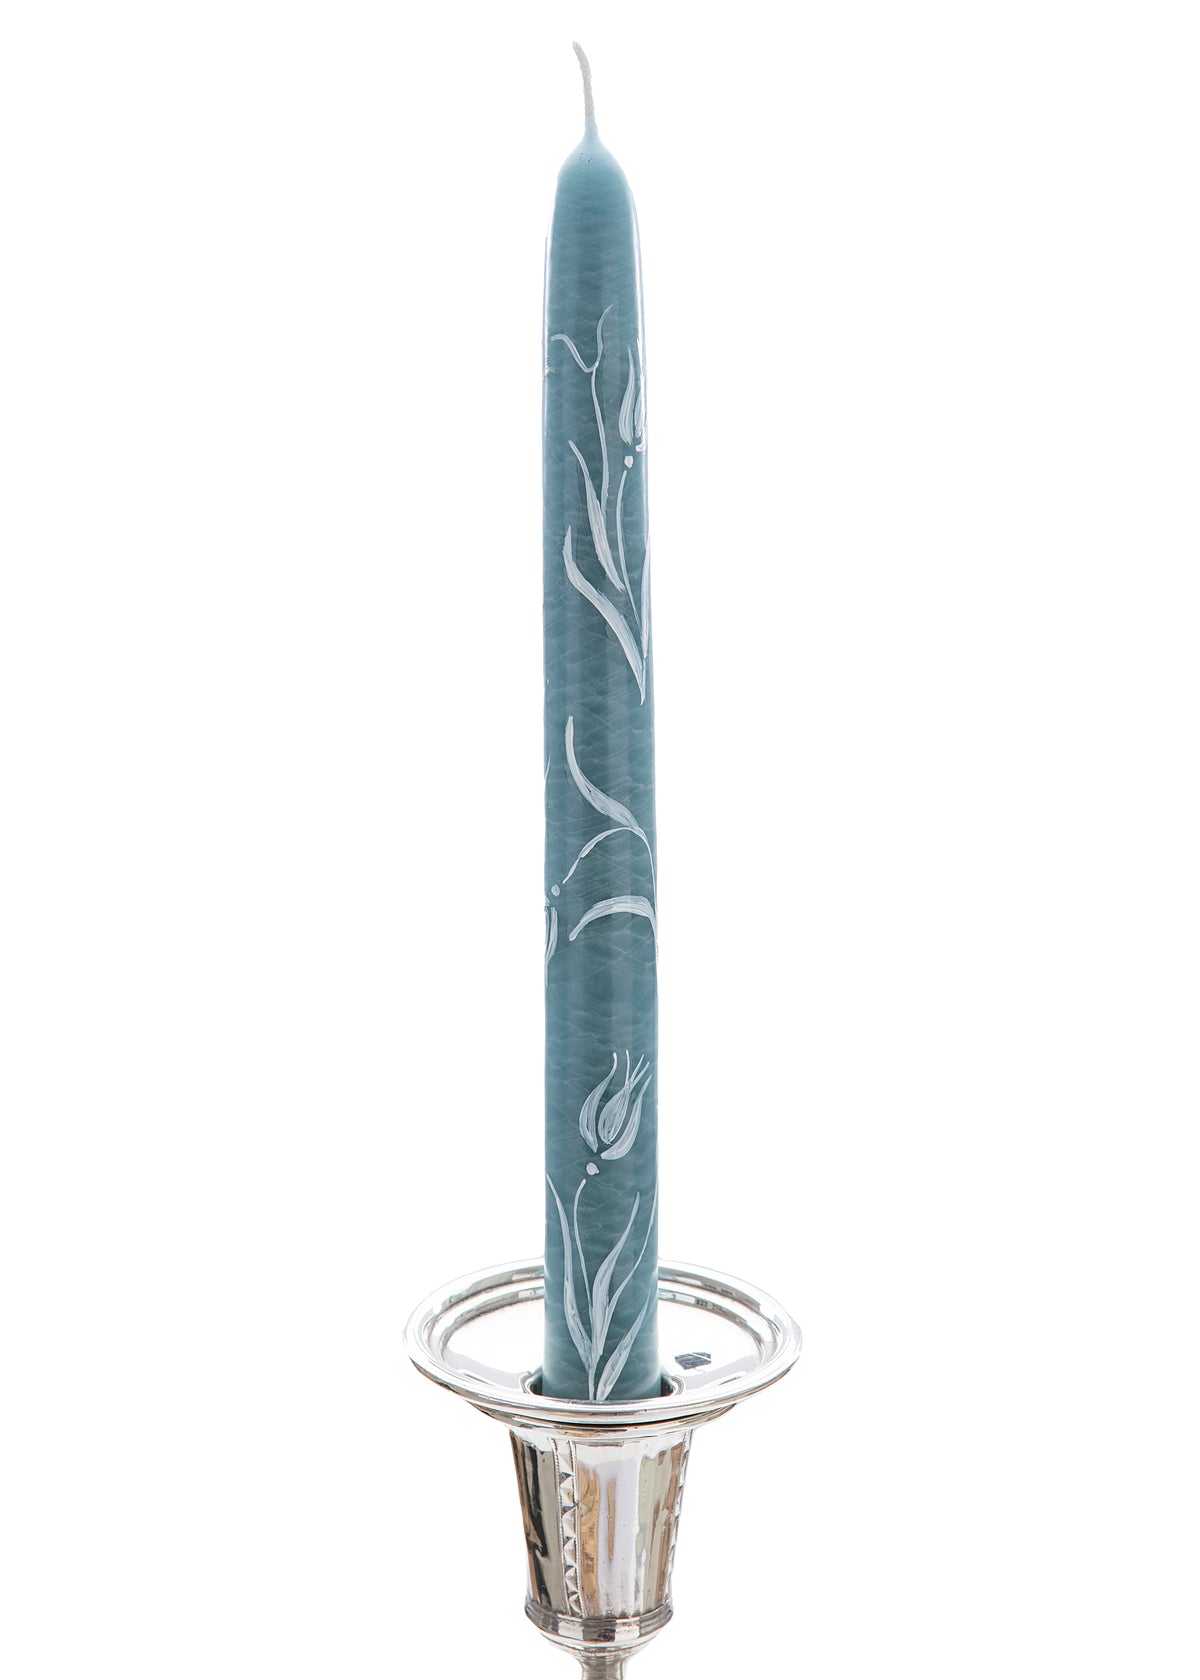 Dusty Blue Tulip Hand-Painted Taper Candles, Set of Two